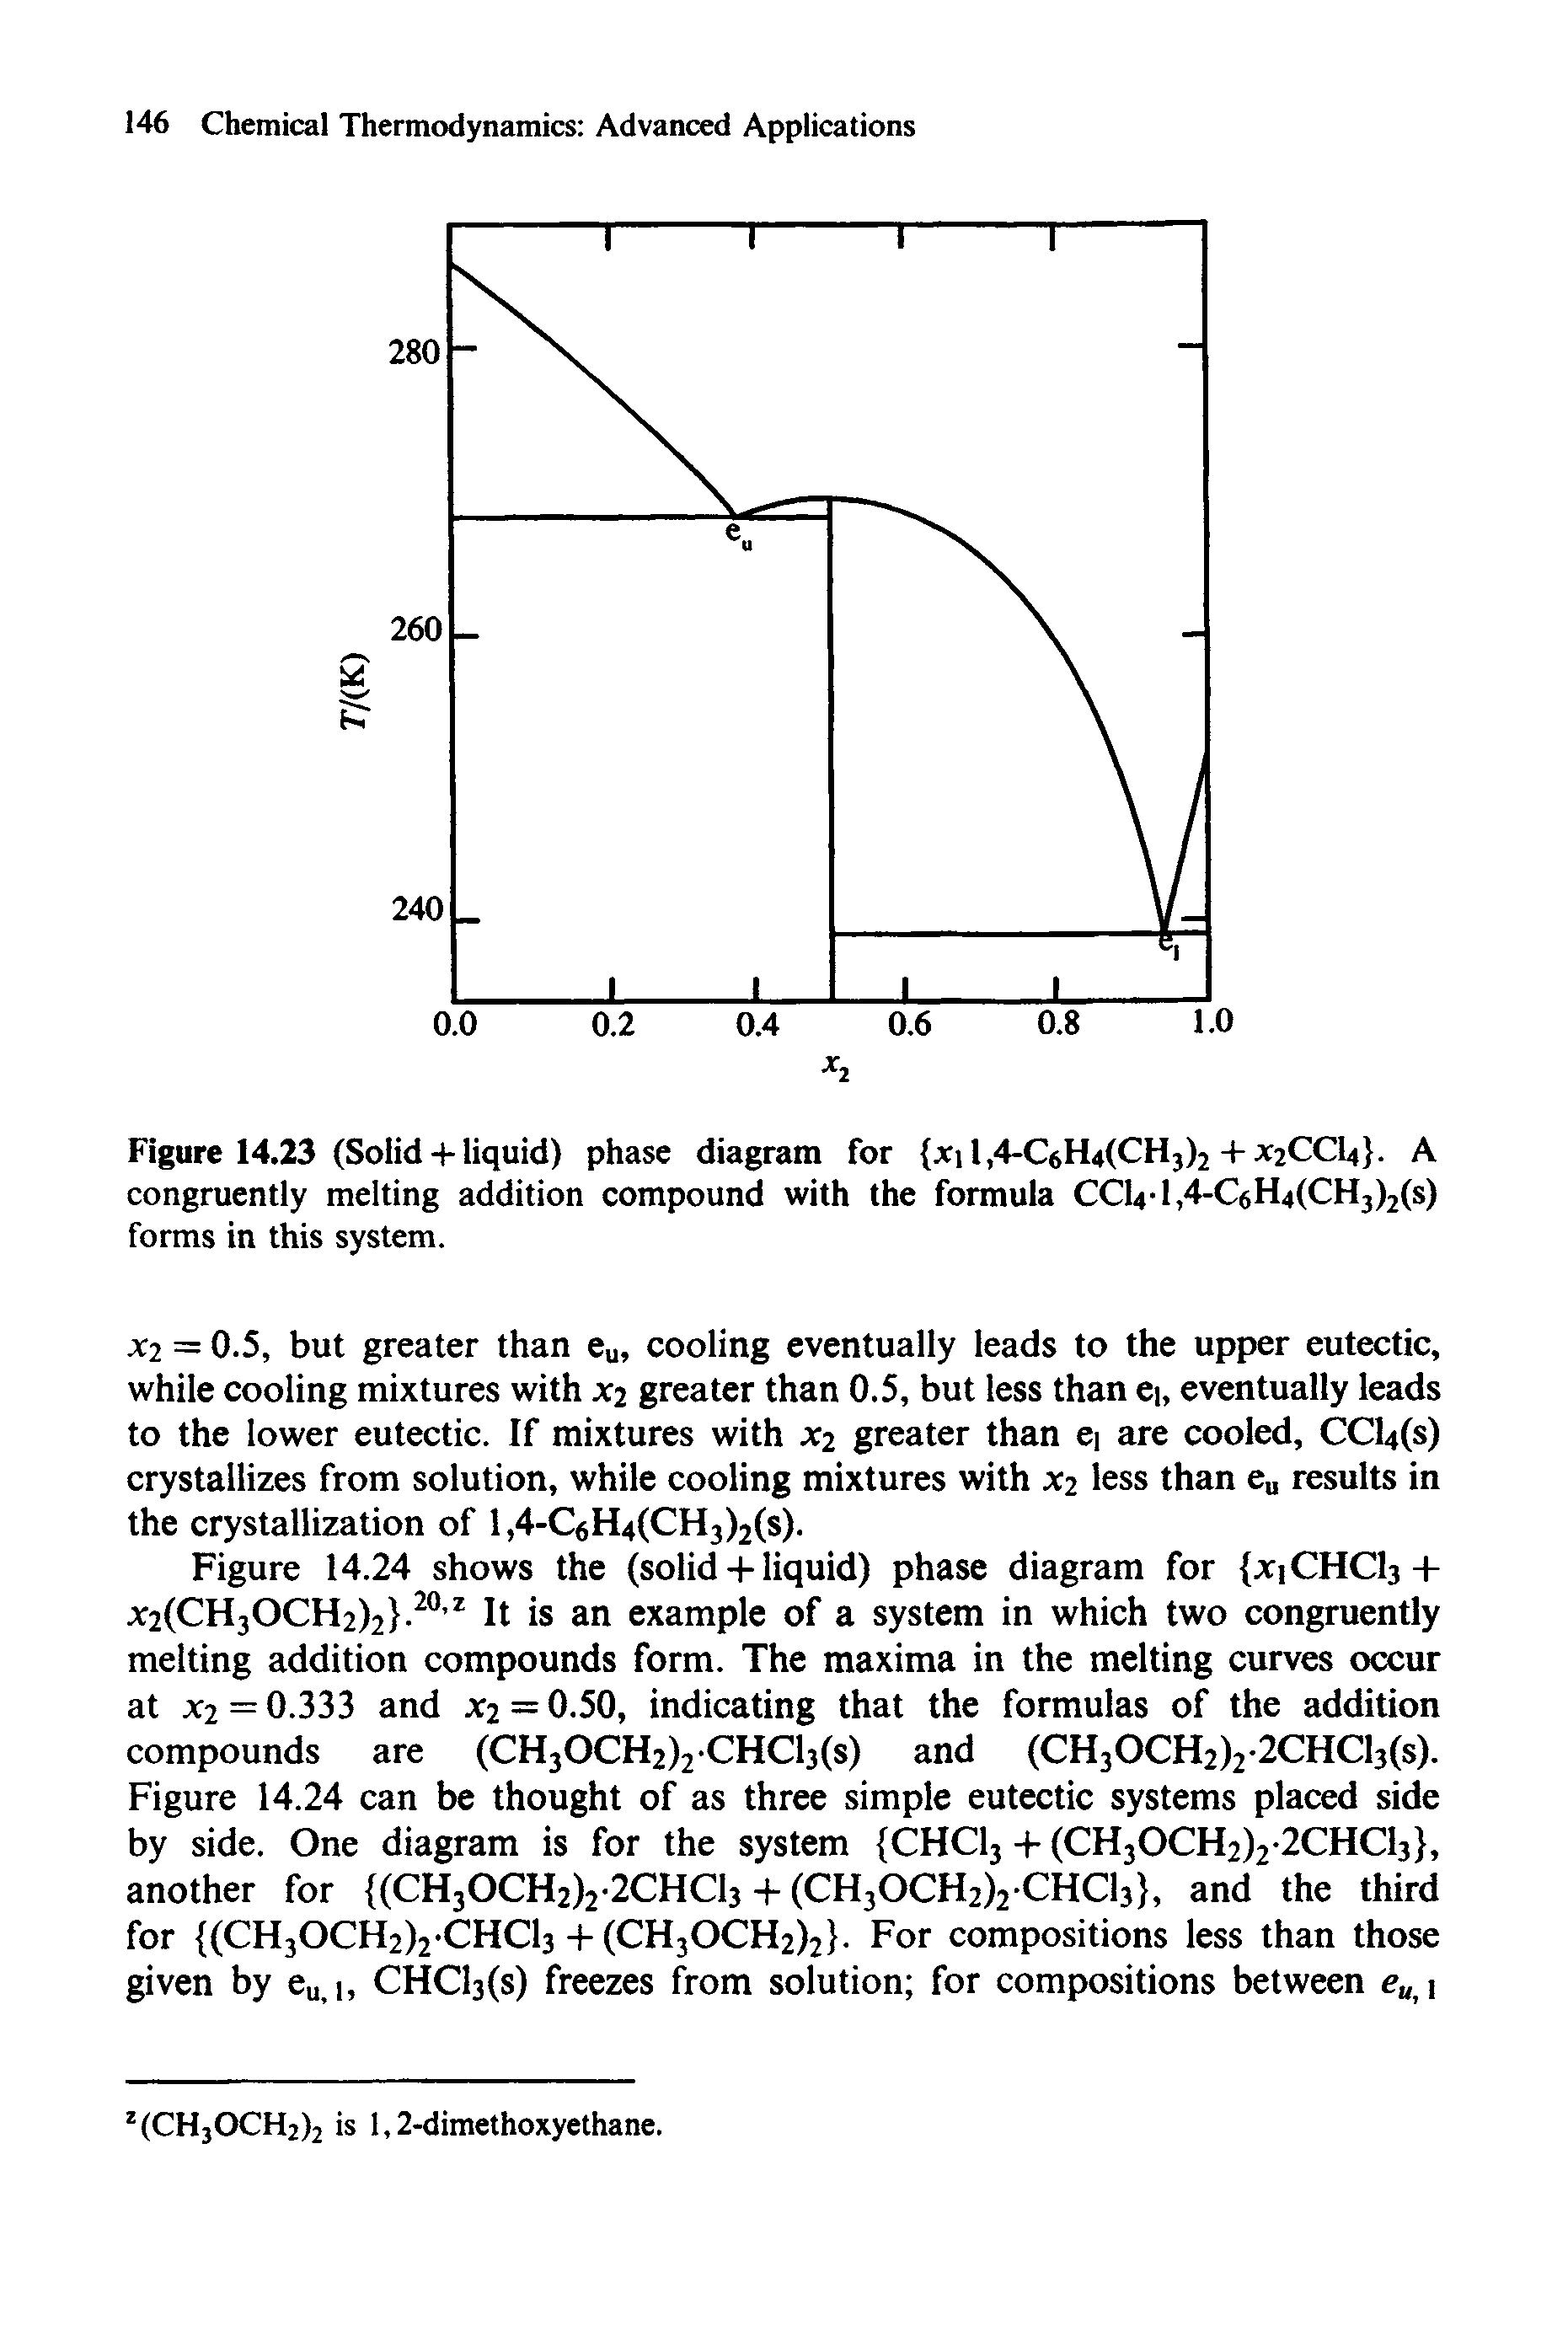 Figure 14.23 (Solid + liquid) phase diagram for il,4-C6H4(CH3)2 + X2CCI4. A congruently melting addition compound with the formula CCl4-l,4-C6H4(CH3)2(s) forms in this system.